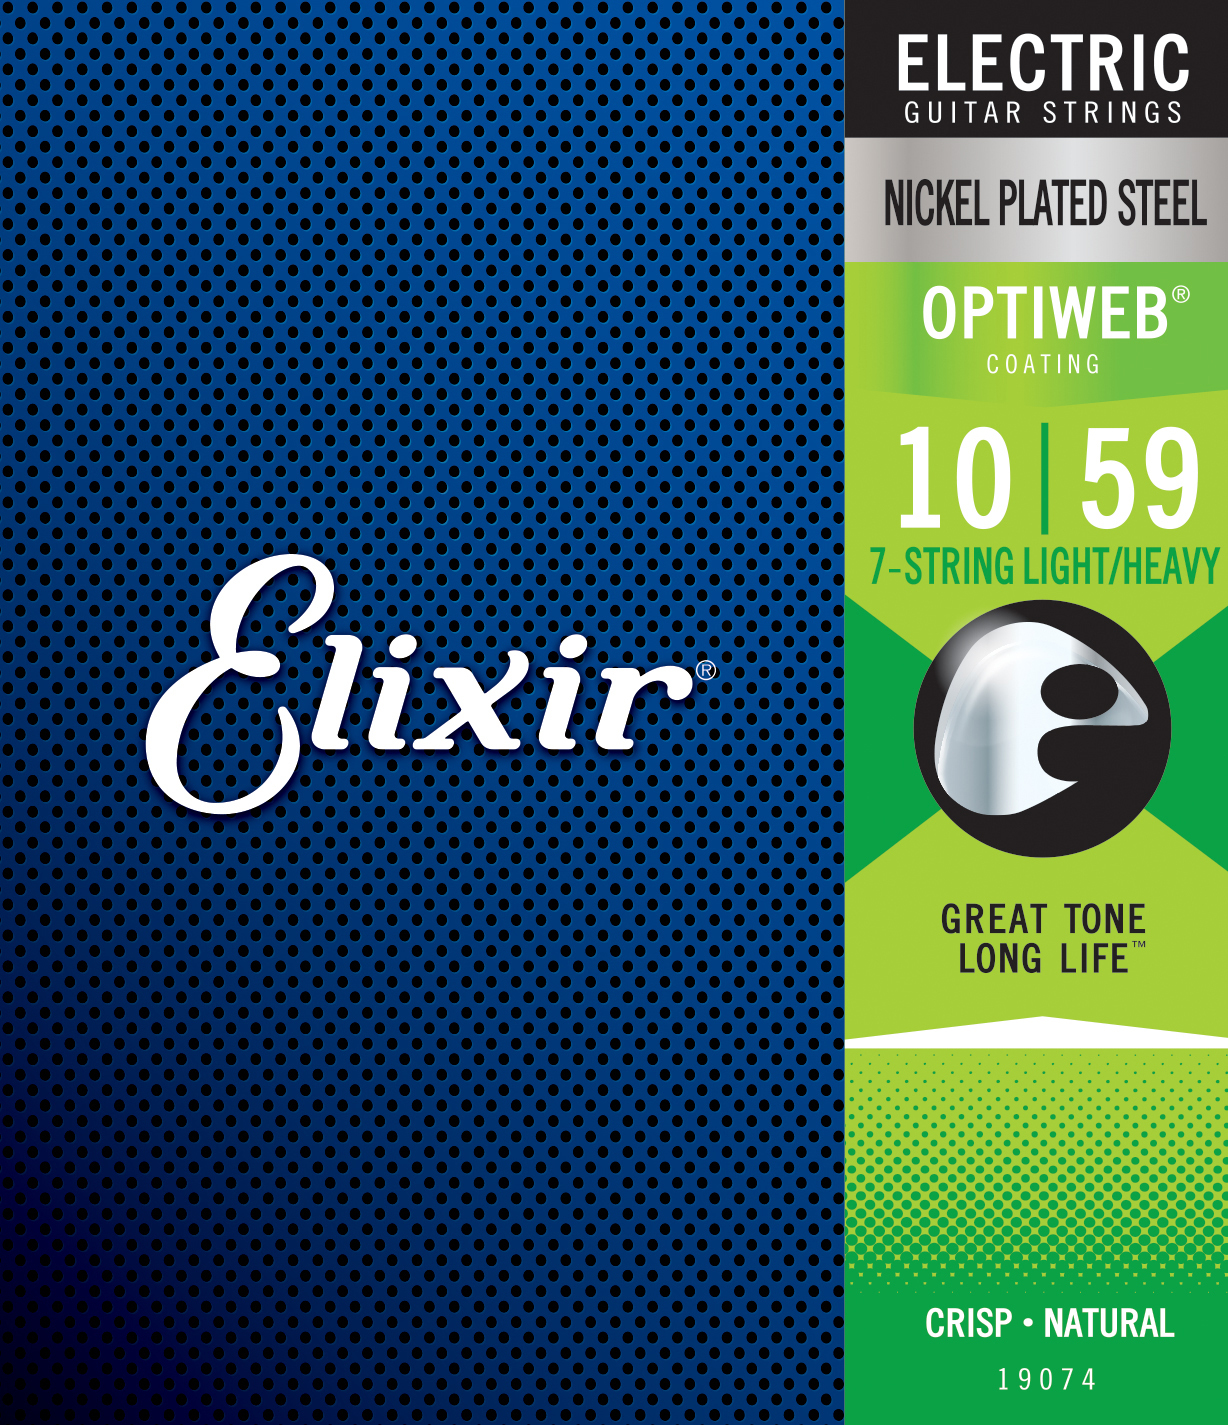 Elixir 19074 7-string Optiweb Nps Electric Guitar 7c Light/heavy 10-59 - Electric guitar strings - Main picture